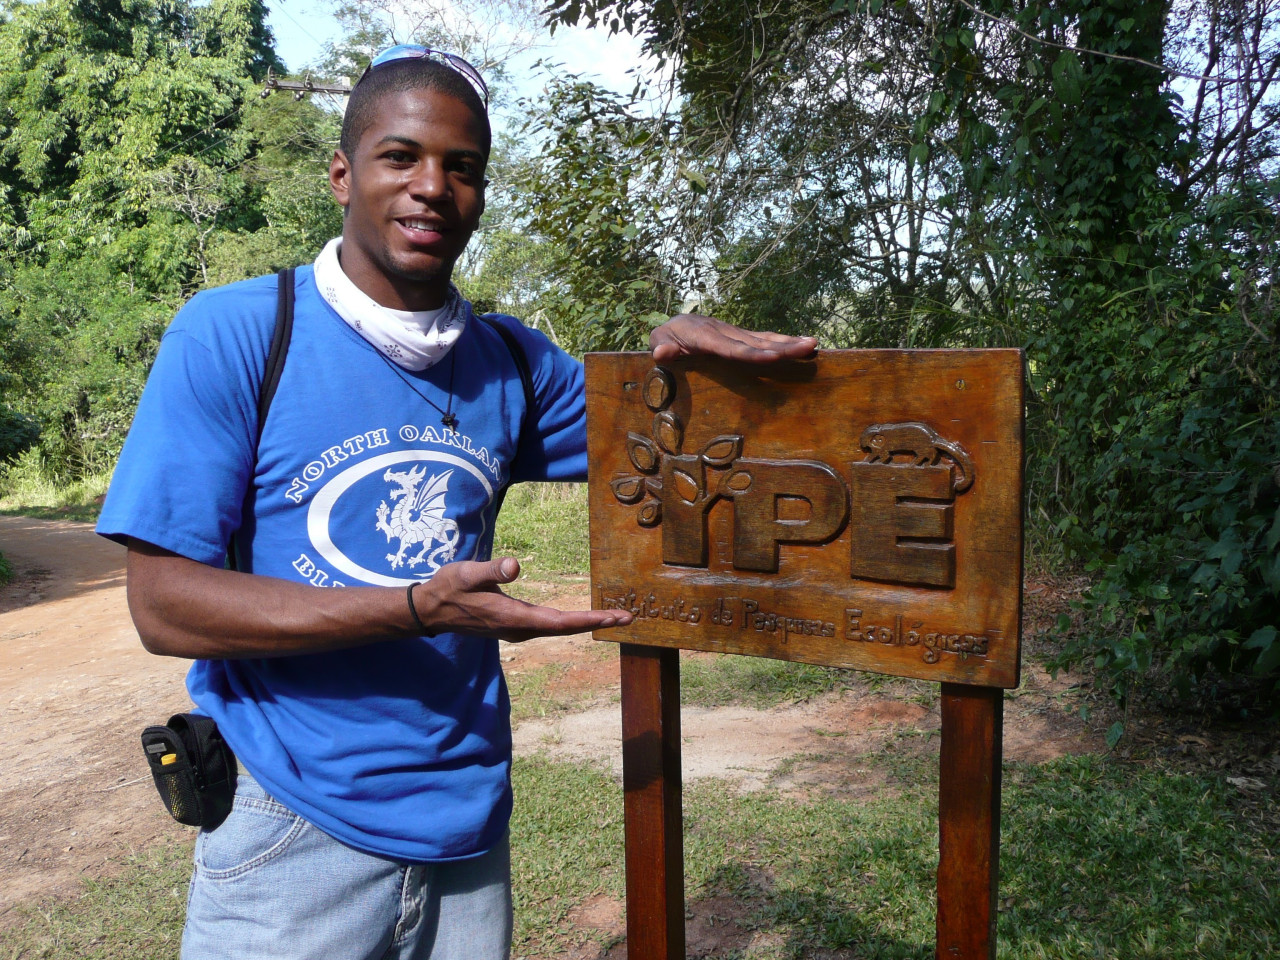 A Black man in a blue t-shirt stands next to a brown wooden sign.